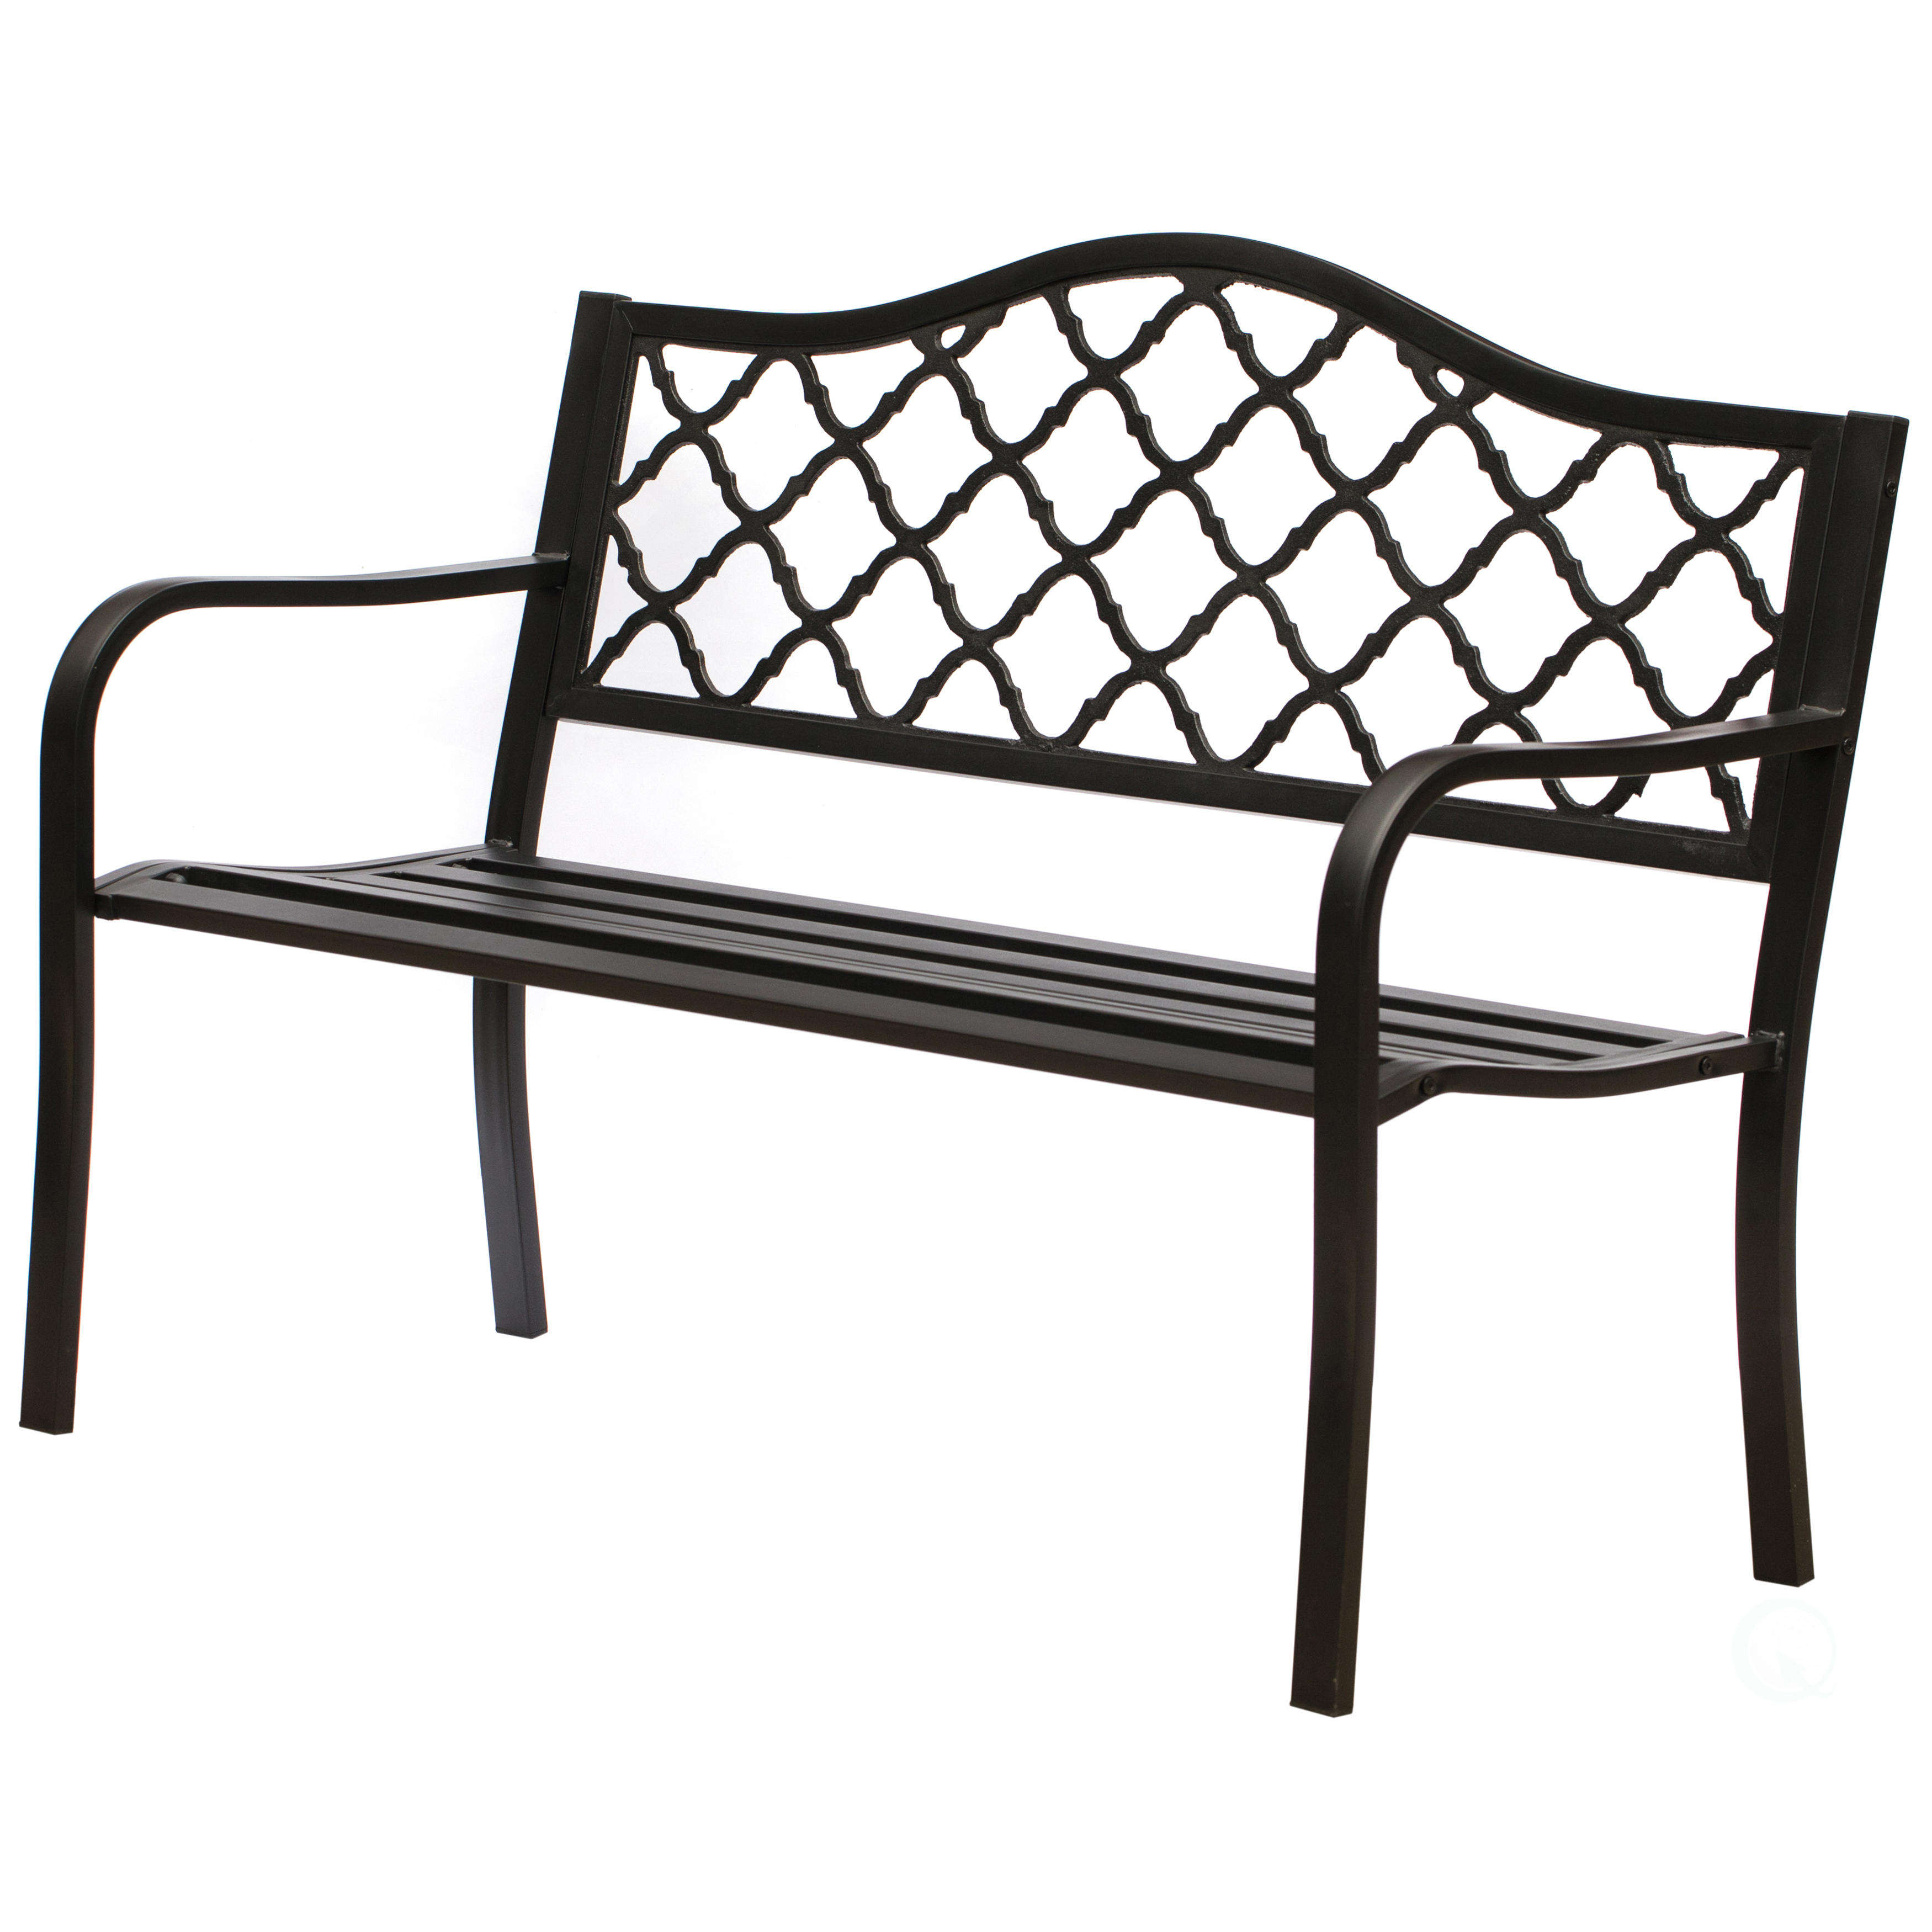 Gardenised Outdoor Garden Patio Steel Park Bench Lawn Decor With Cast Iron Back, Black Seating Bench For Yard, Patio, Garden And Deck